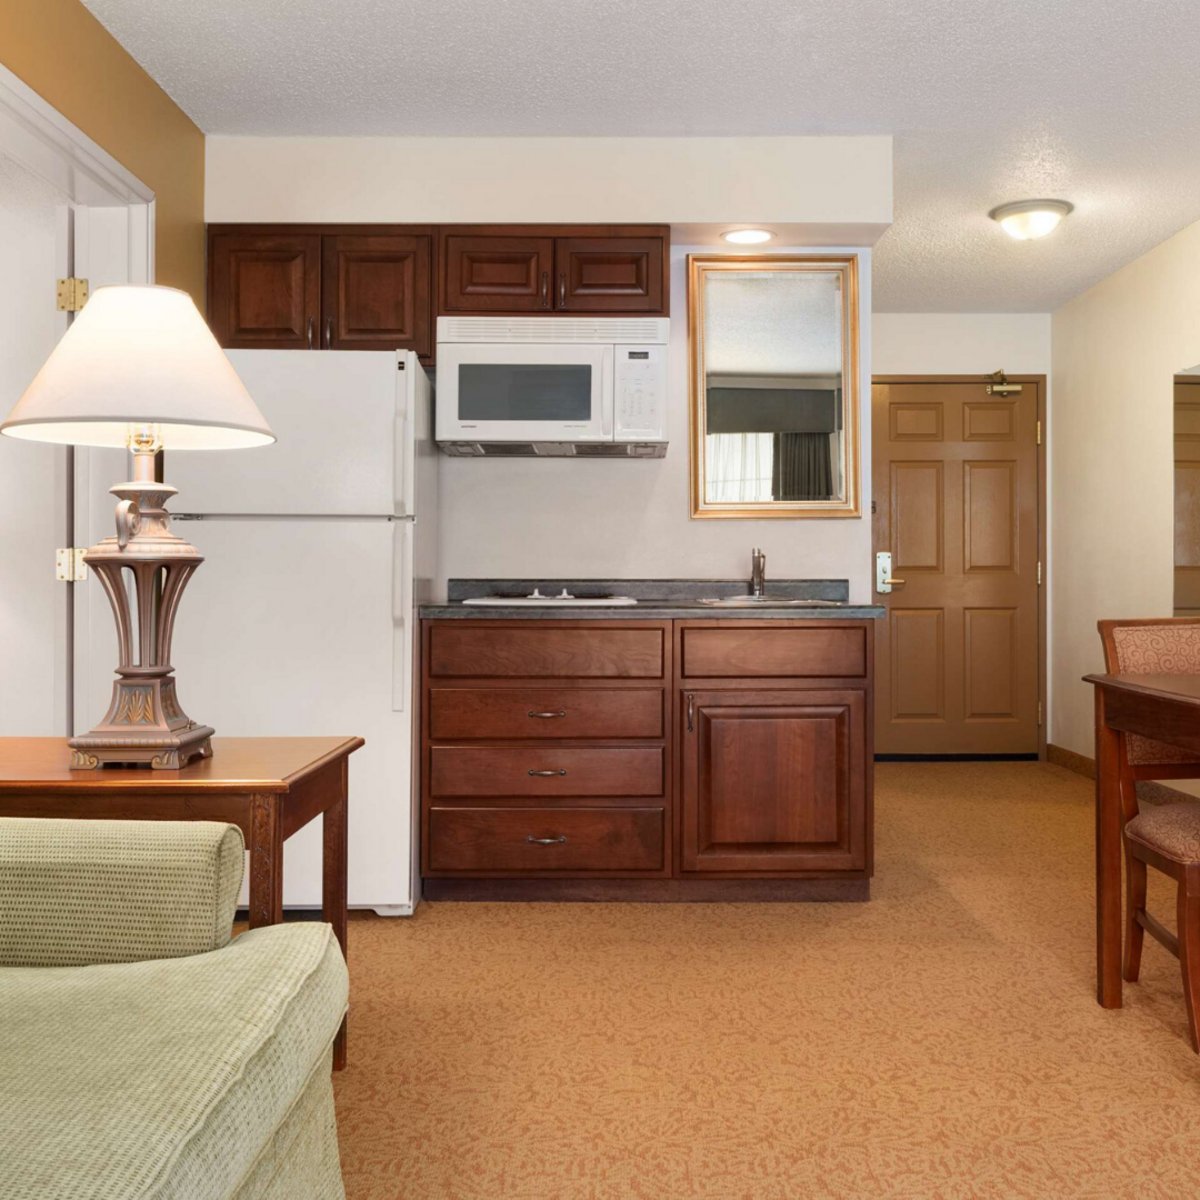 Business travelers often choose an #extendedstay #hotel when in town for #work trips. Our in-room desks, free WiFi, & convenient Business Center are perfect for your travel needs. Book our extended-stay suite & enjoy all the conveniences of home. bit.ly/43QDgGz